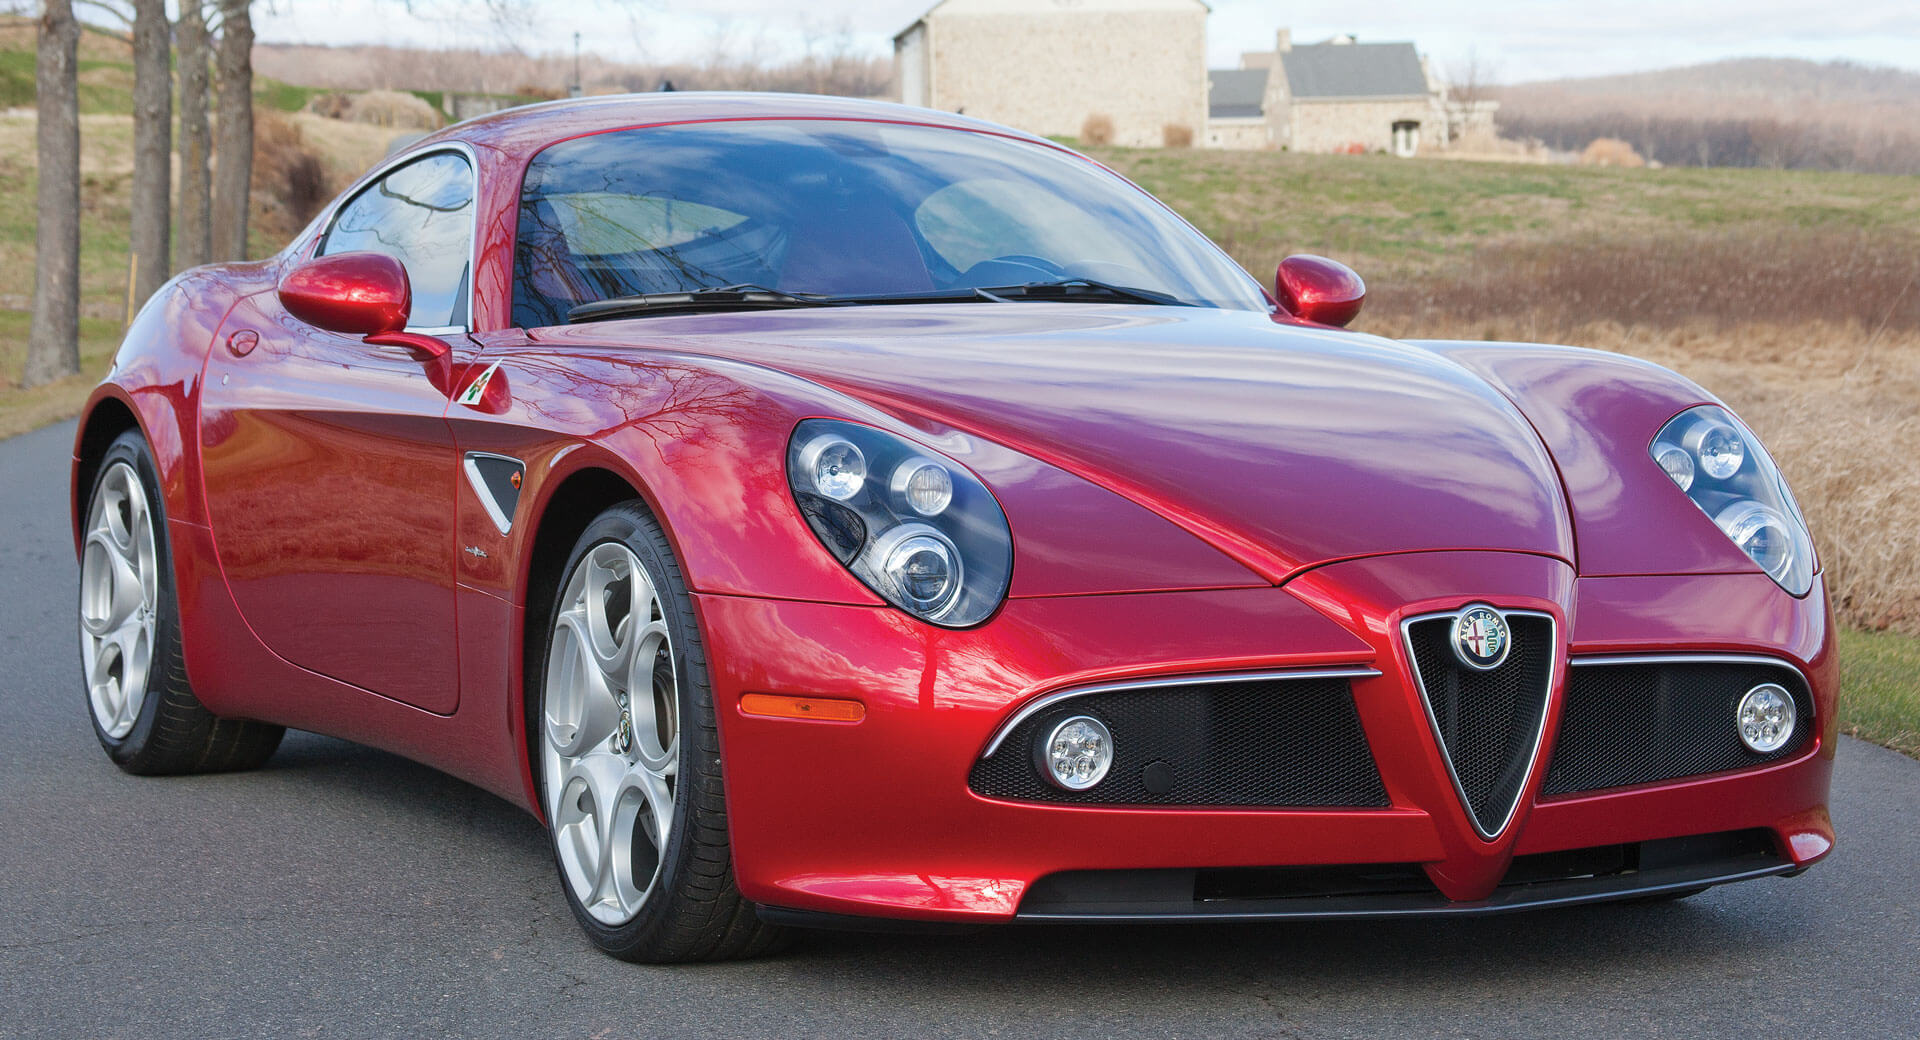 Dashing Alfa Romeo 8C Competizione Is Love At First Sight | Carscoops